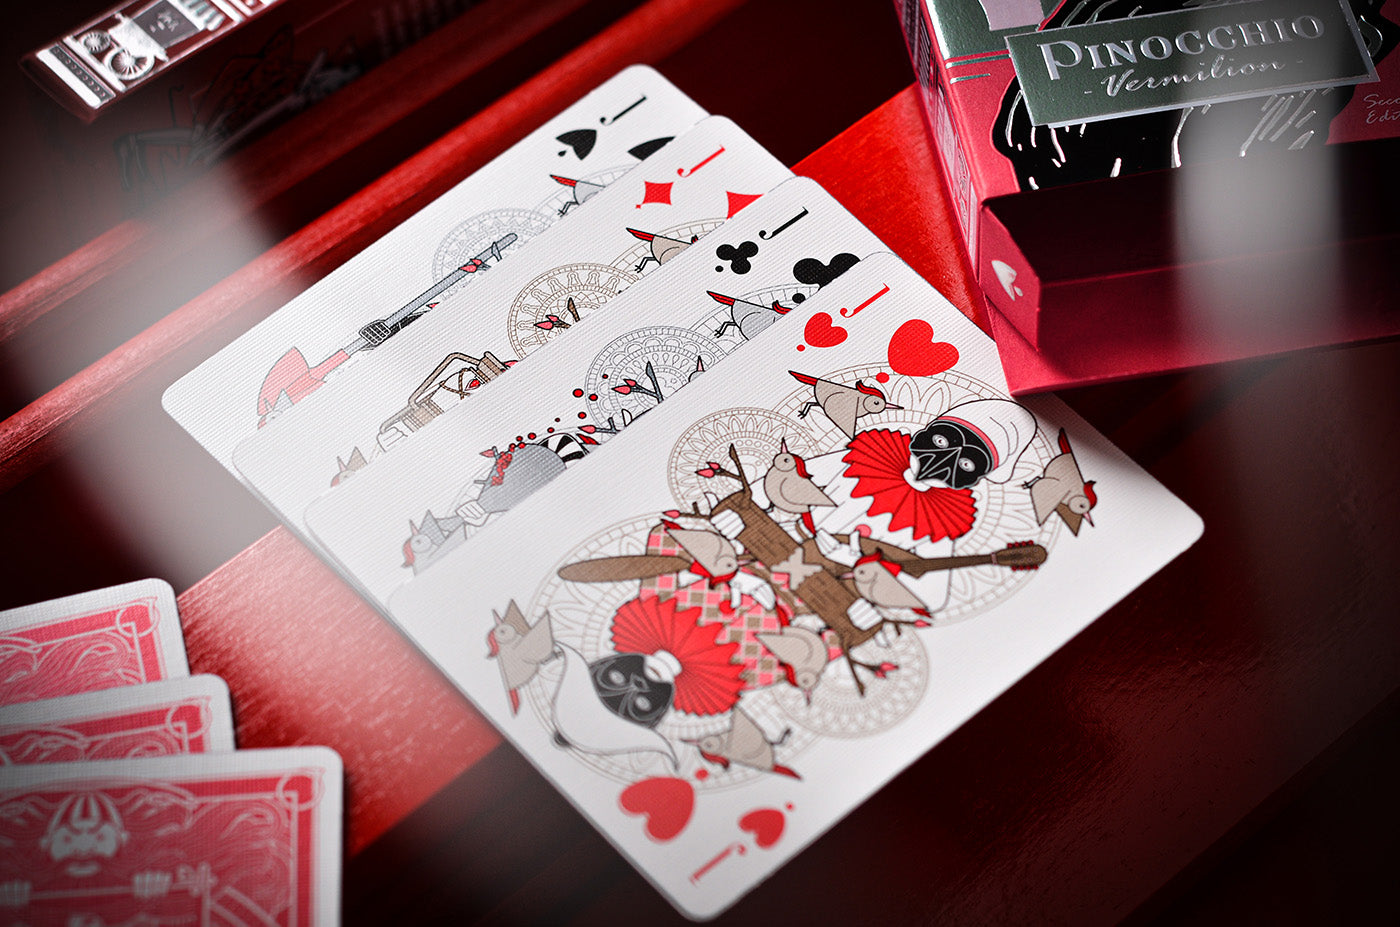 Le Avventure di Pinocchio — The World of Playing Cards